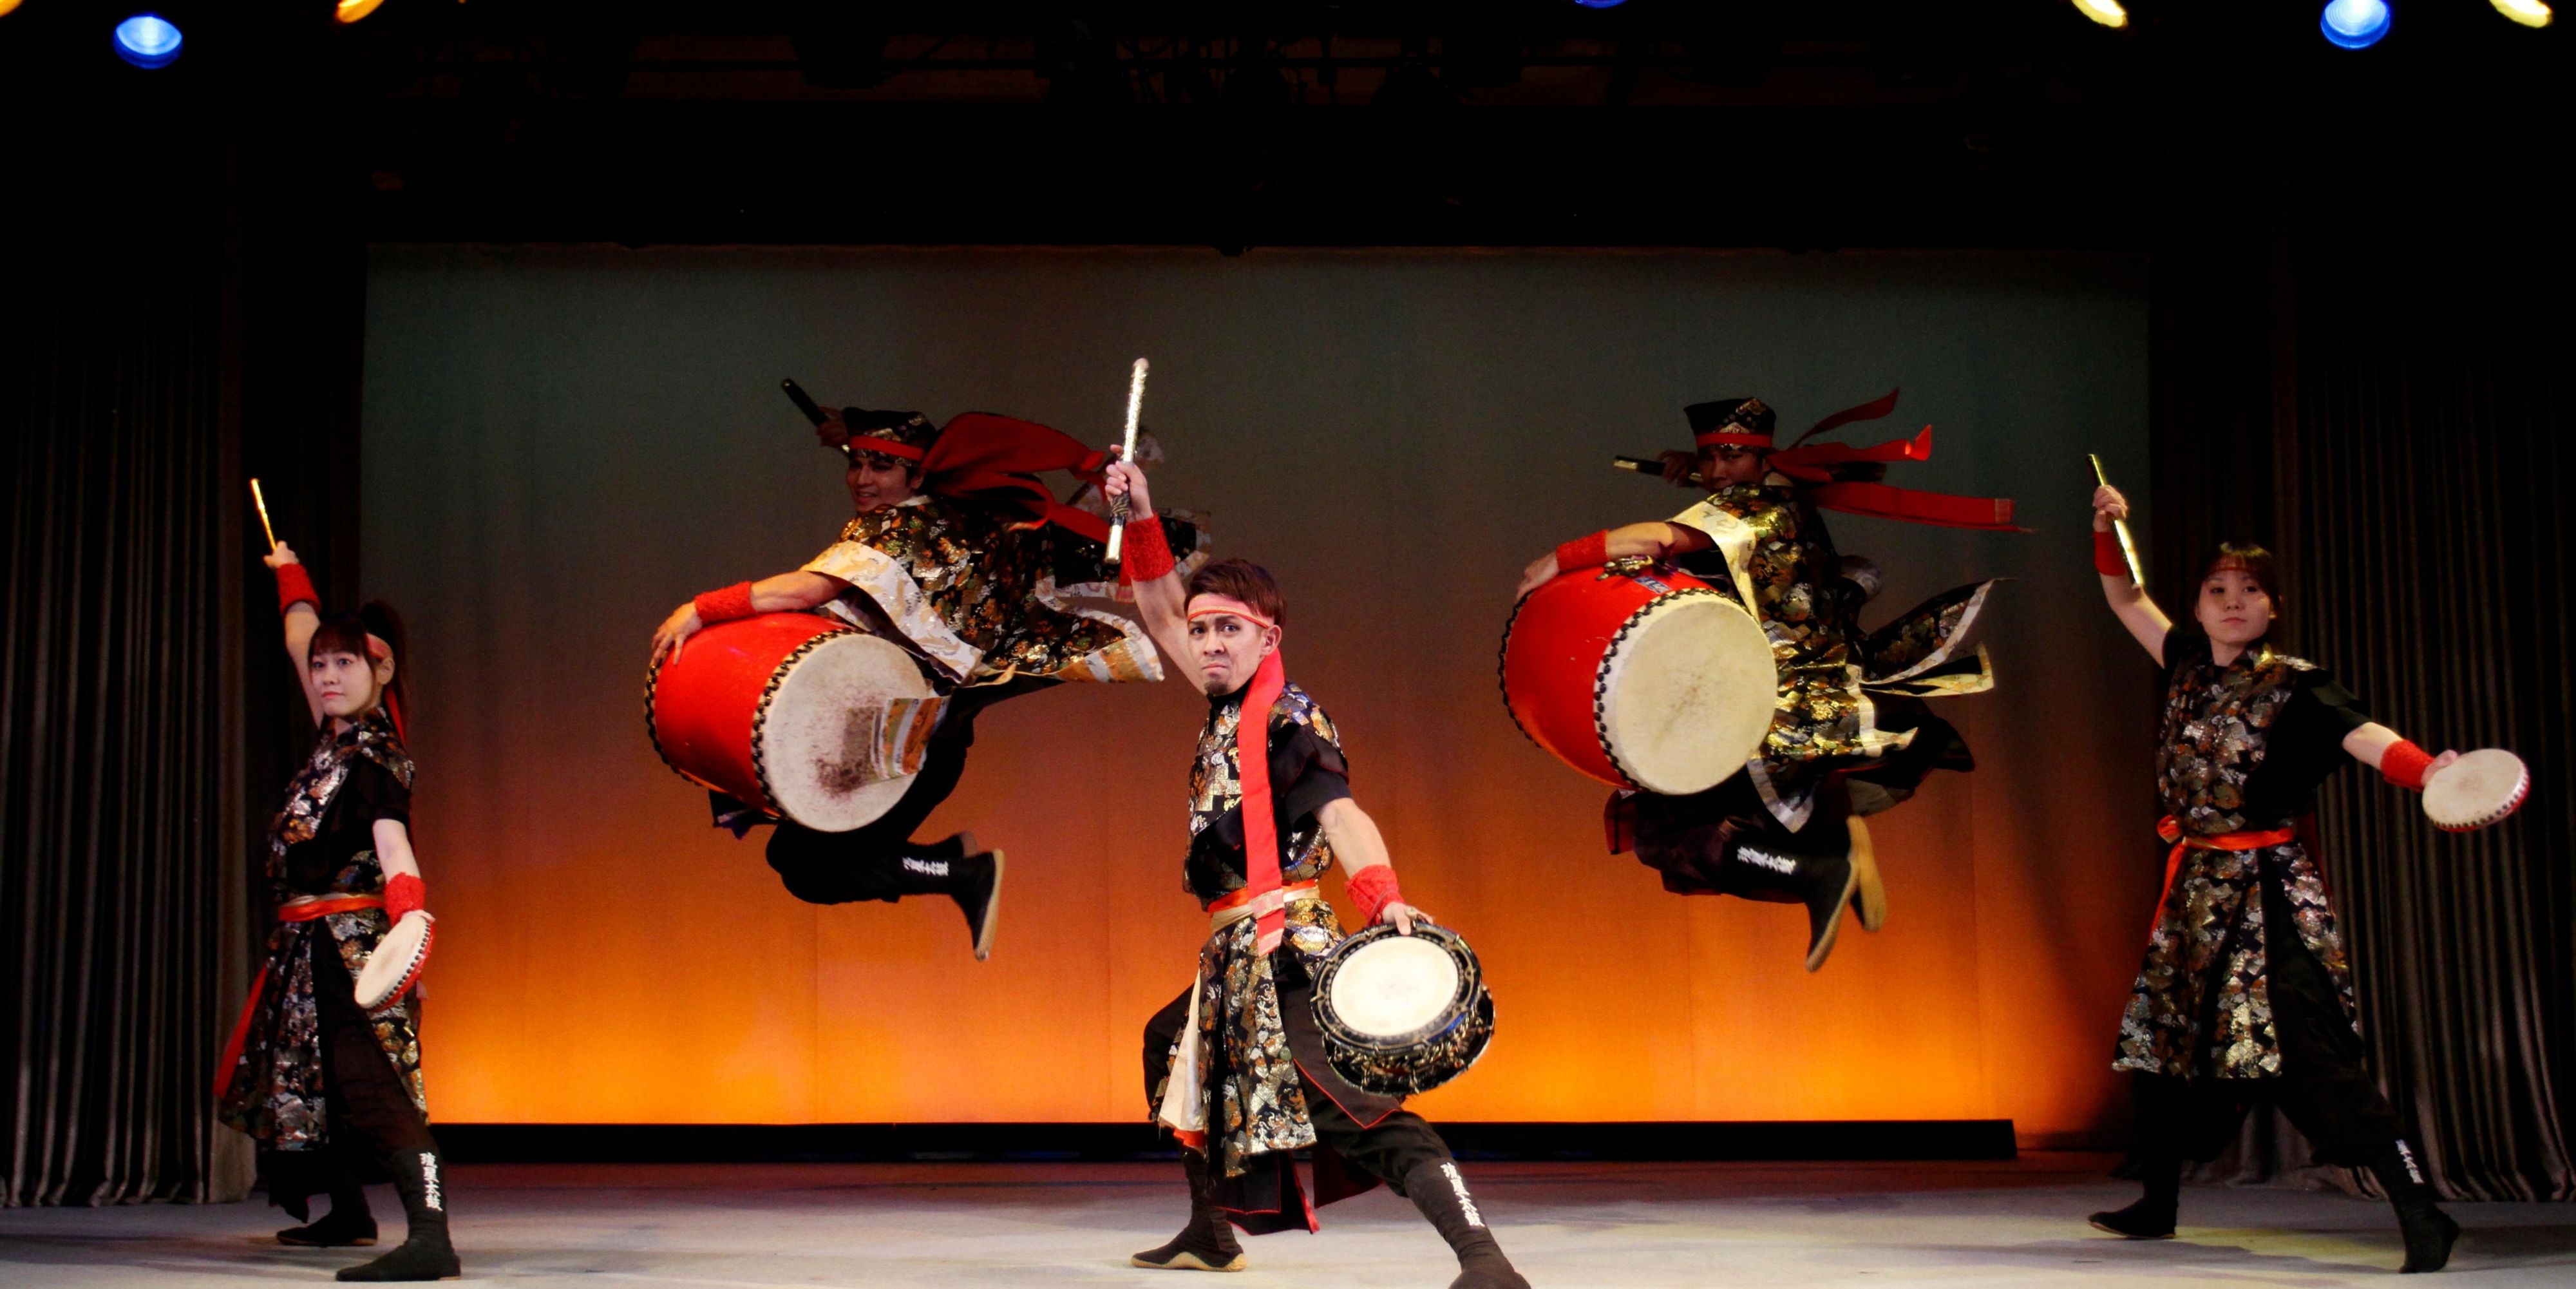 Experience a traditional Ryukyu Island drum and dance performance and an authentic Okinawan buffet, featuring unique Okinawan ingredients. During entertaining live shows, Orchid offers authentic Ryukyu Island drum shows (Eisa) and traditional dances.